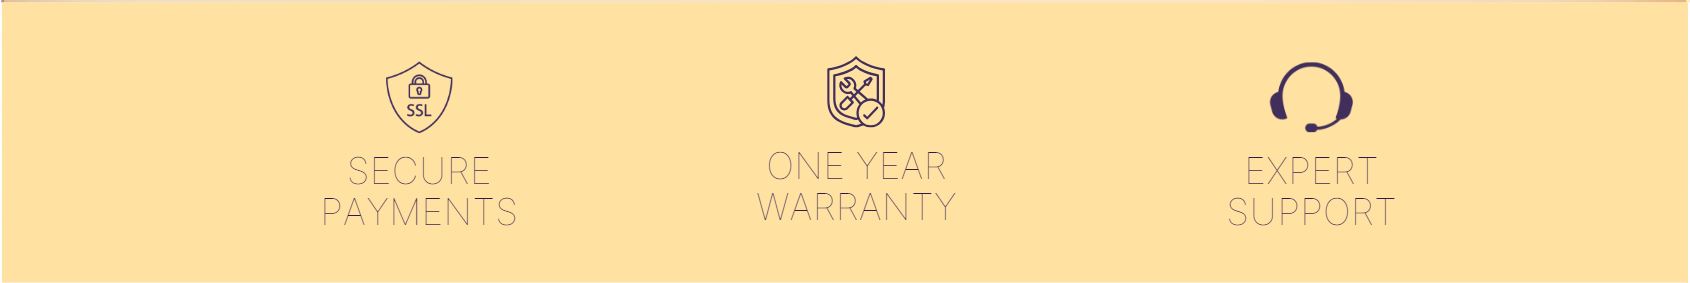 Secure Payments, One Year Warranty, Expert Support